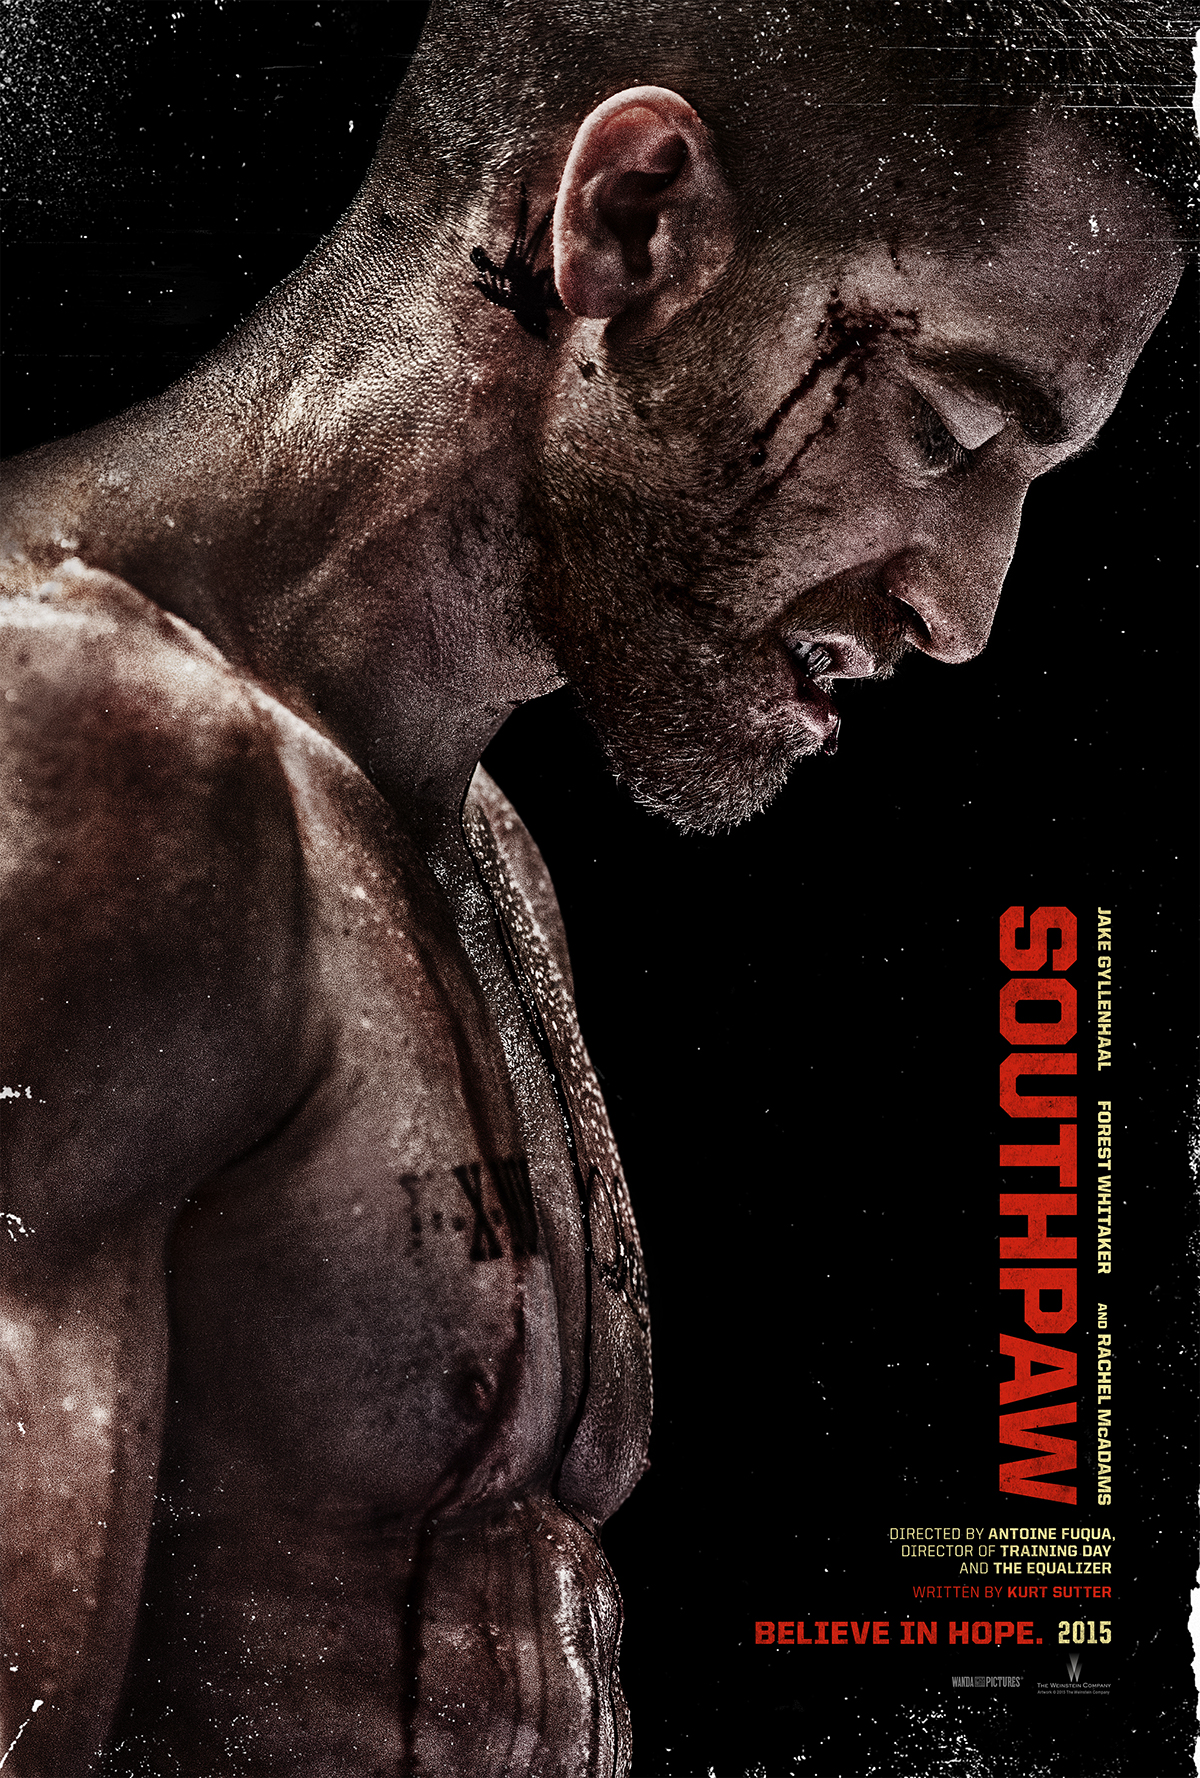 The Weinstein Company weinstein co southpaw Theatrical print teaser poster Entertainment